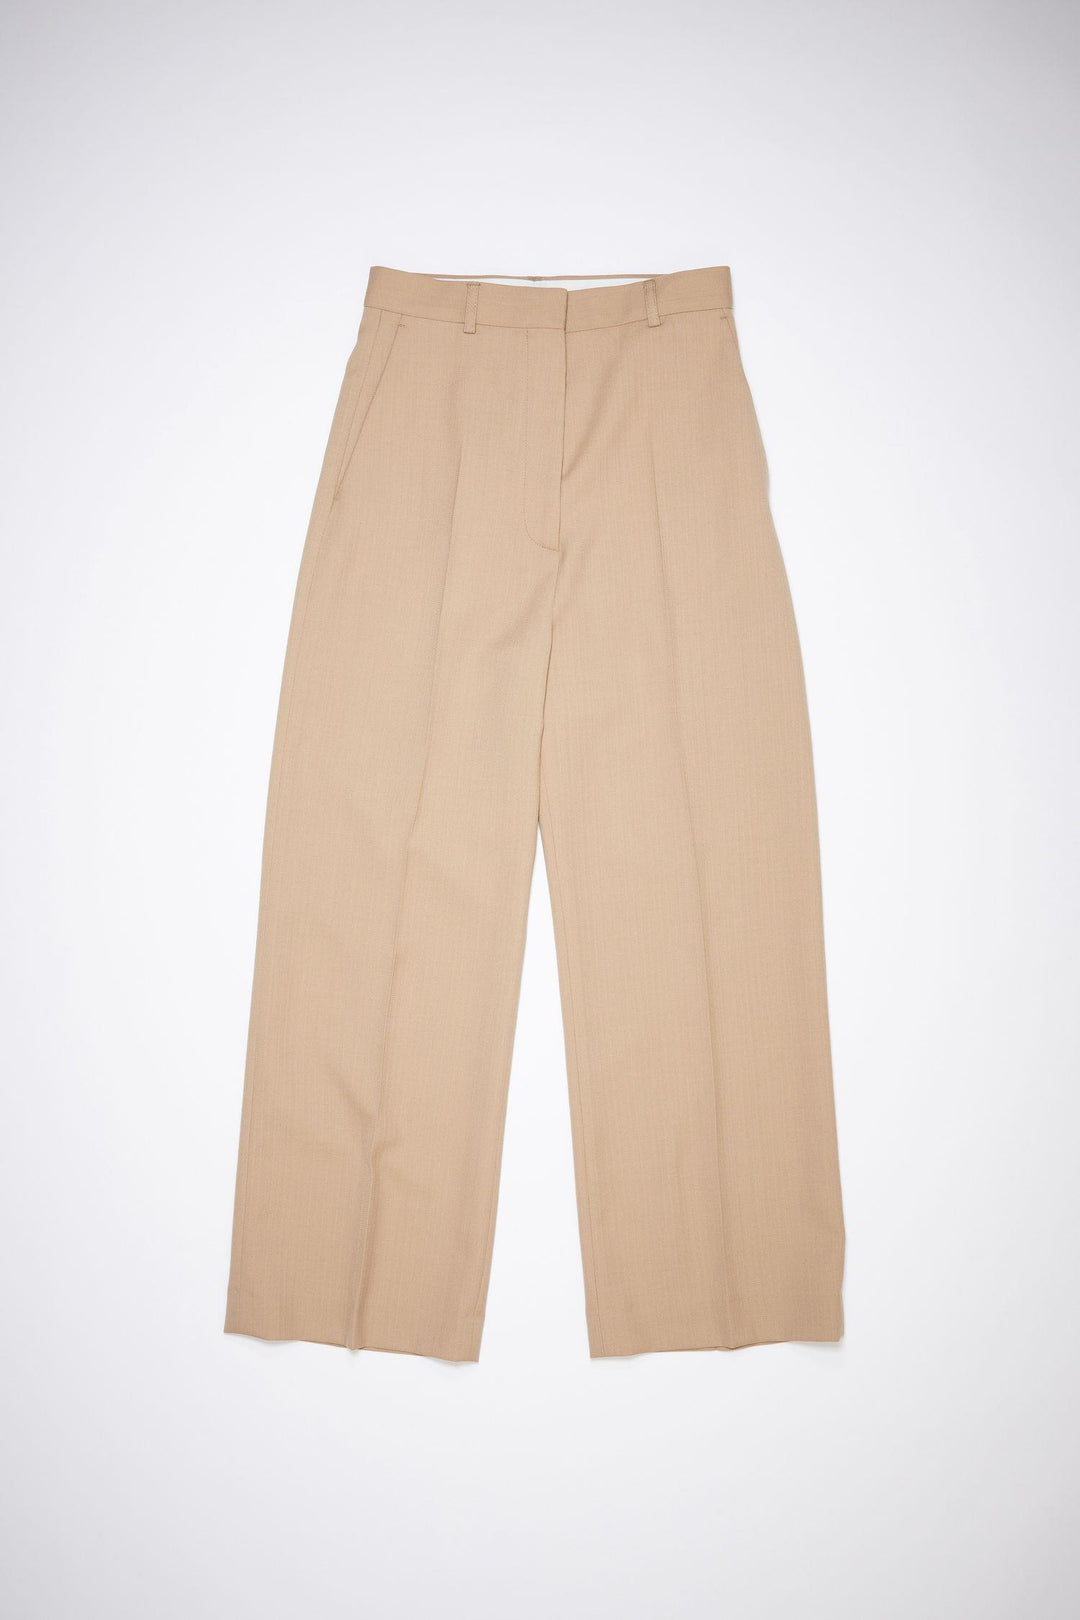 ACNE STUDIOS - TAILORED TROUSERS - BEIGE - Dale